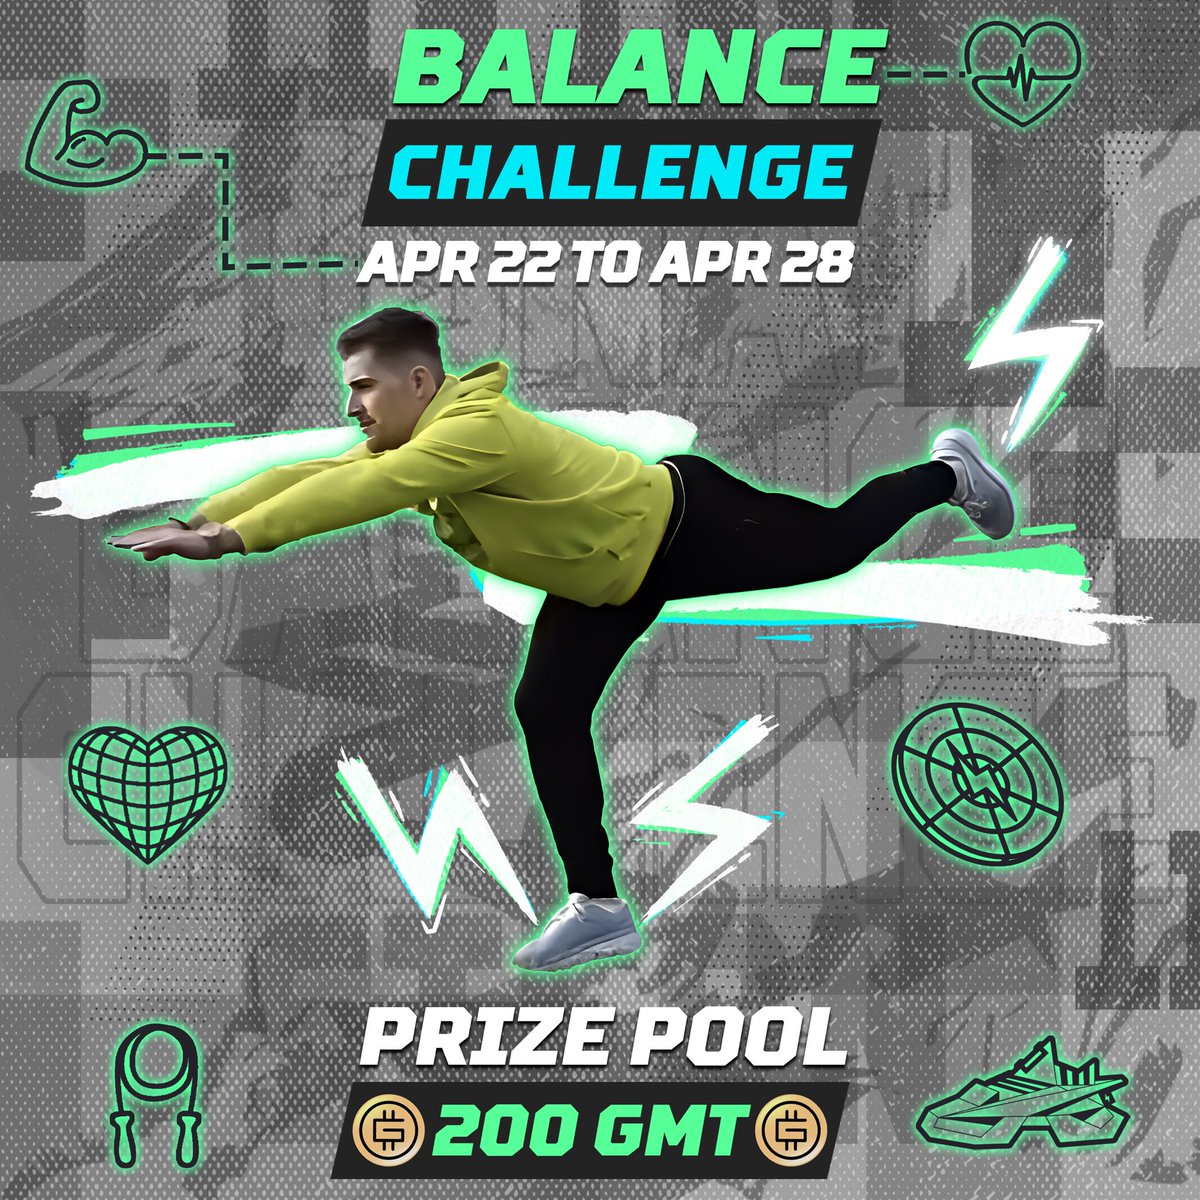 HEY World! Time to do a challenge😀 let's go!🔥 🏆Random Prize 200 $GMT (4 winners) ⏬To participate you need⏬ 1️⃣ Repeat the exercise, and post a photo or video in the comments below📸 2️⃣Like and Repost🔁 3️⃣Follow: @1gnateth @Enzus @Stepnofficial 4️⃣Use hashtag